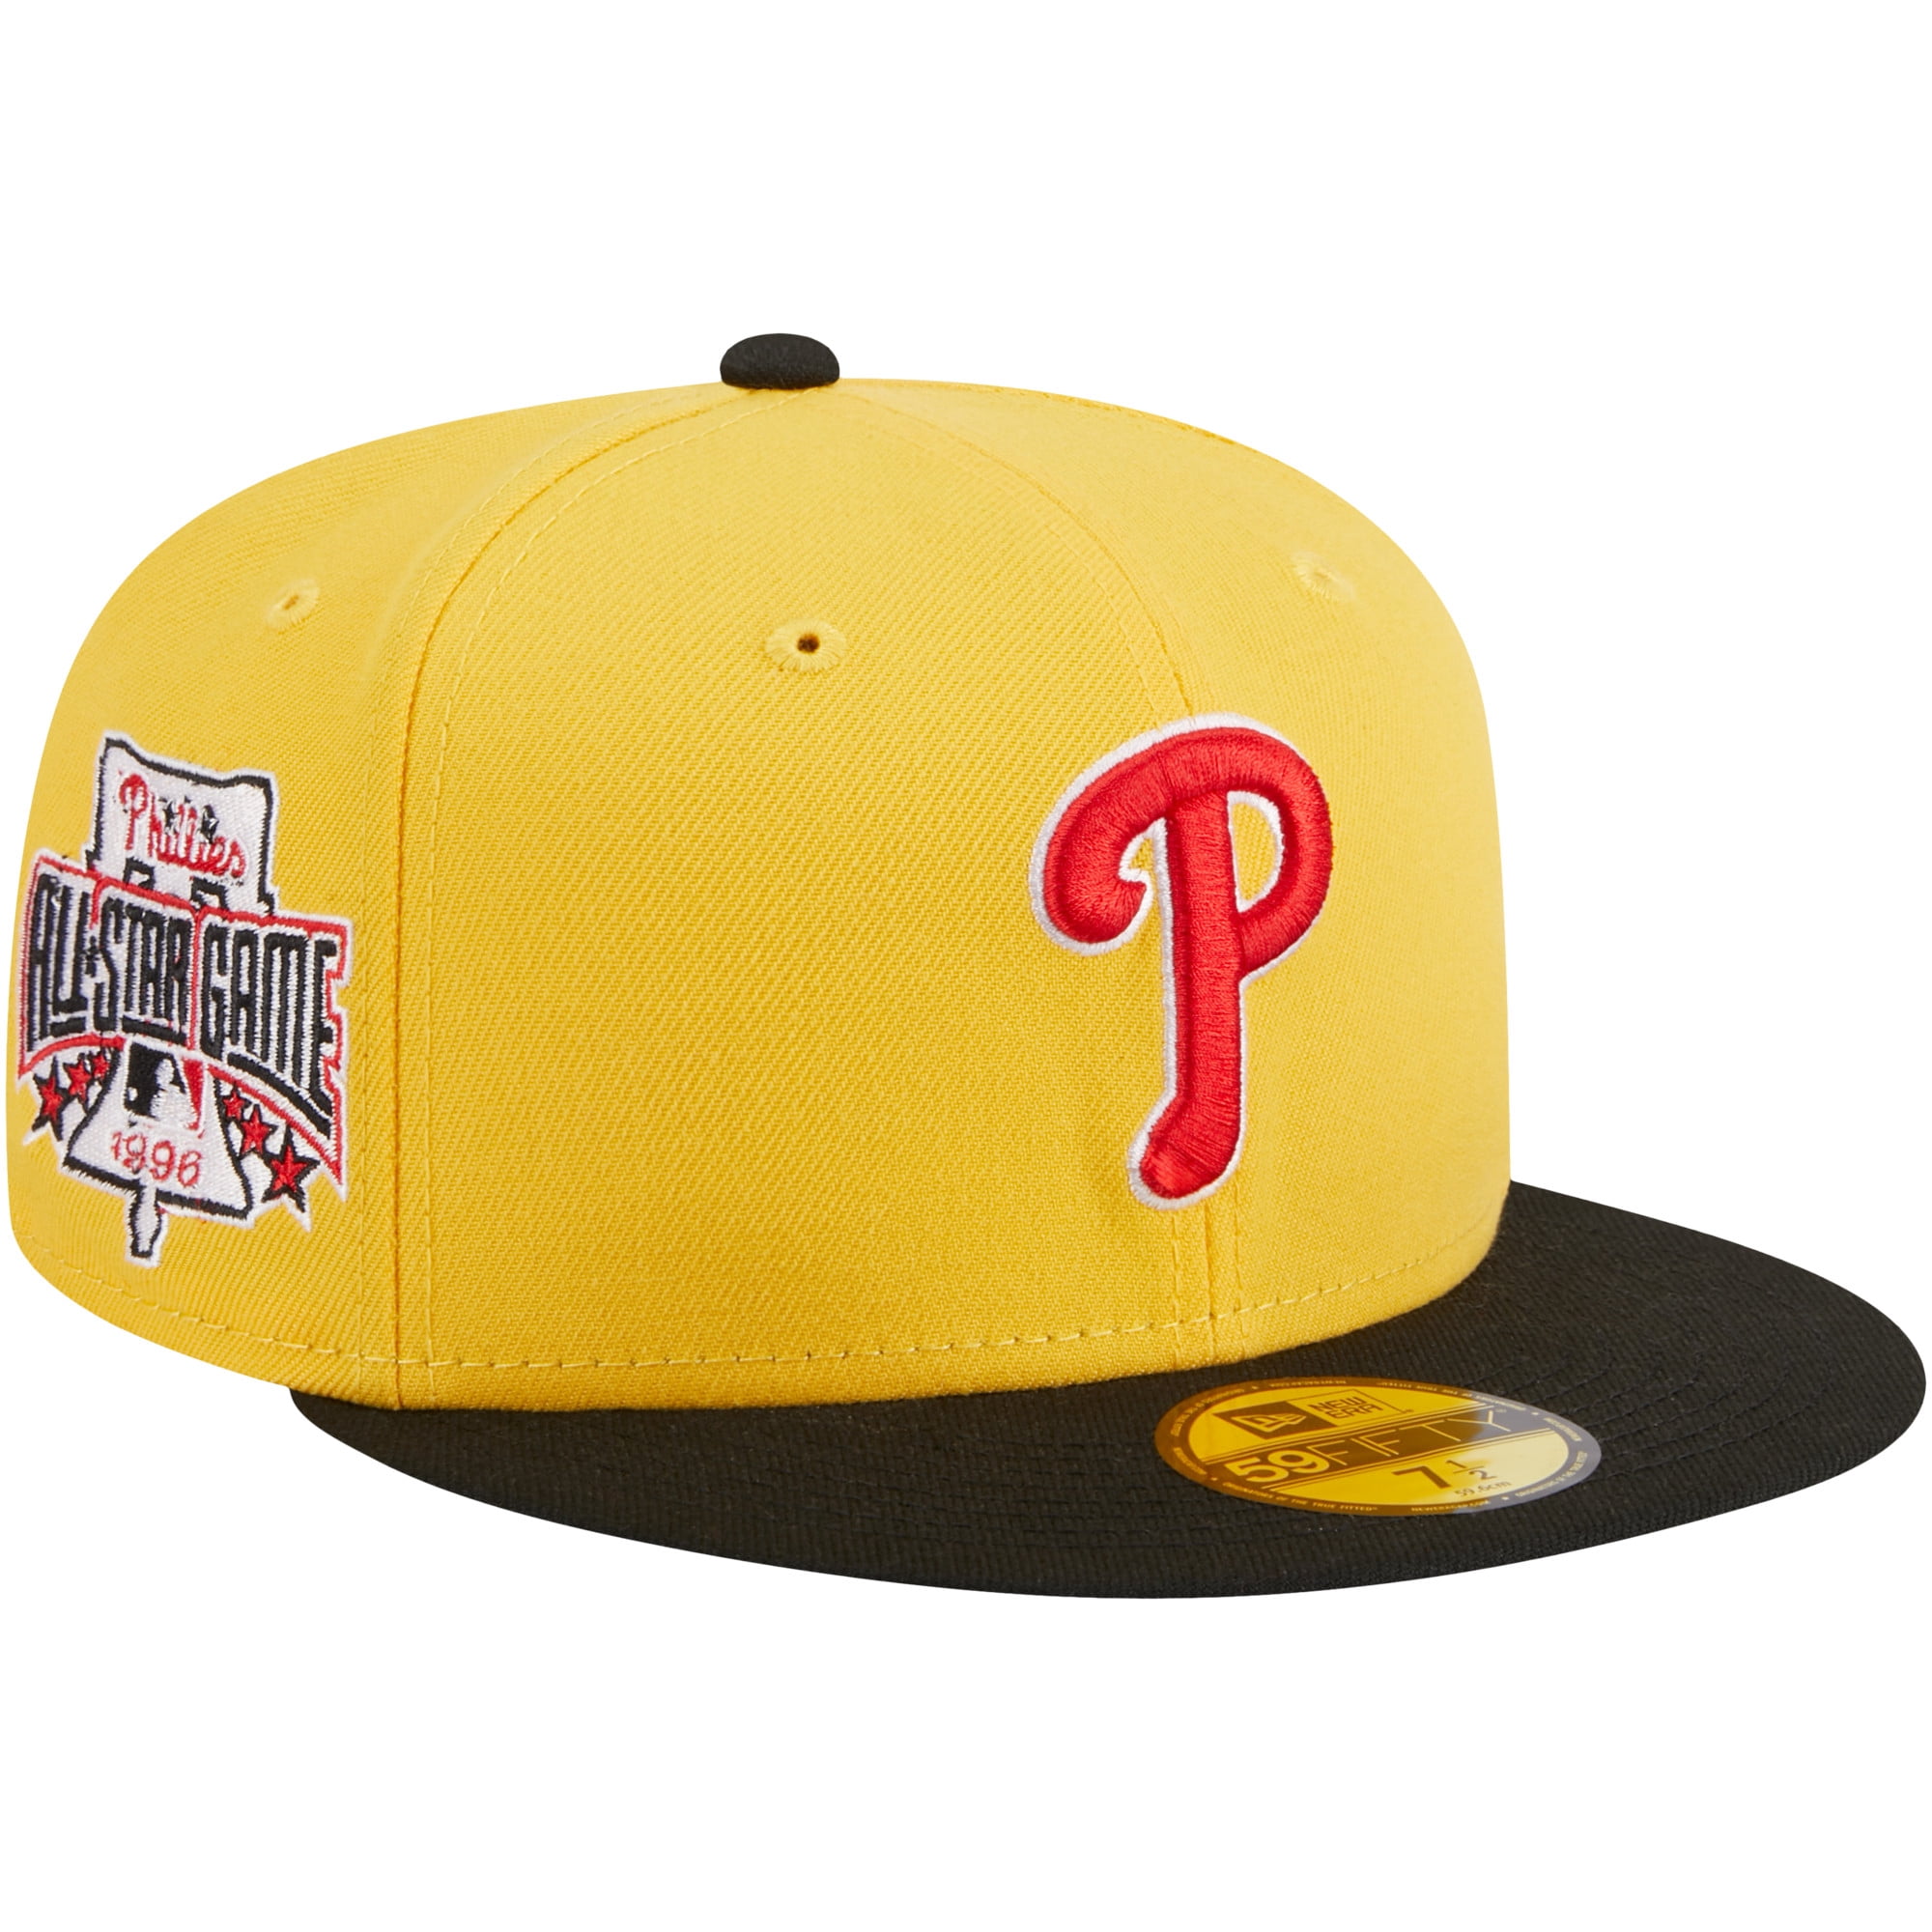 Men's New Era Yellow/Black Philadelphia Phillies Grilled 59FIFTY Fitted Hat  